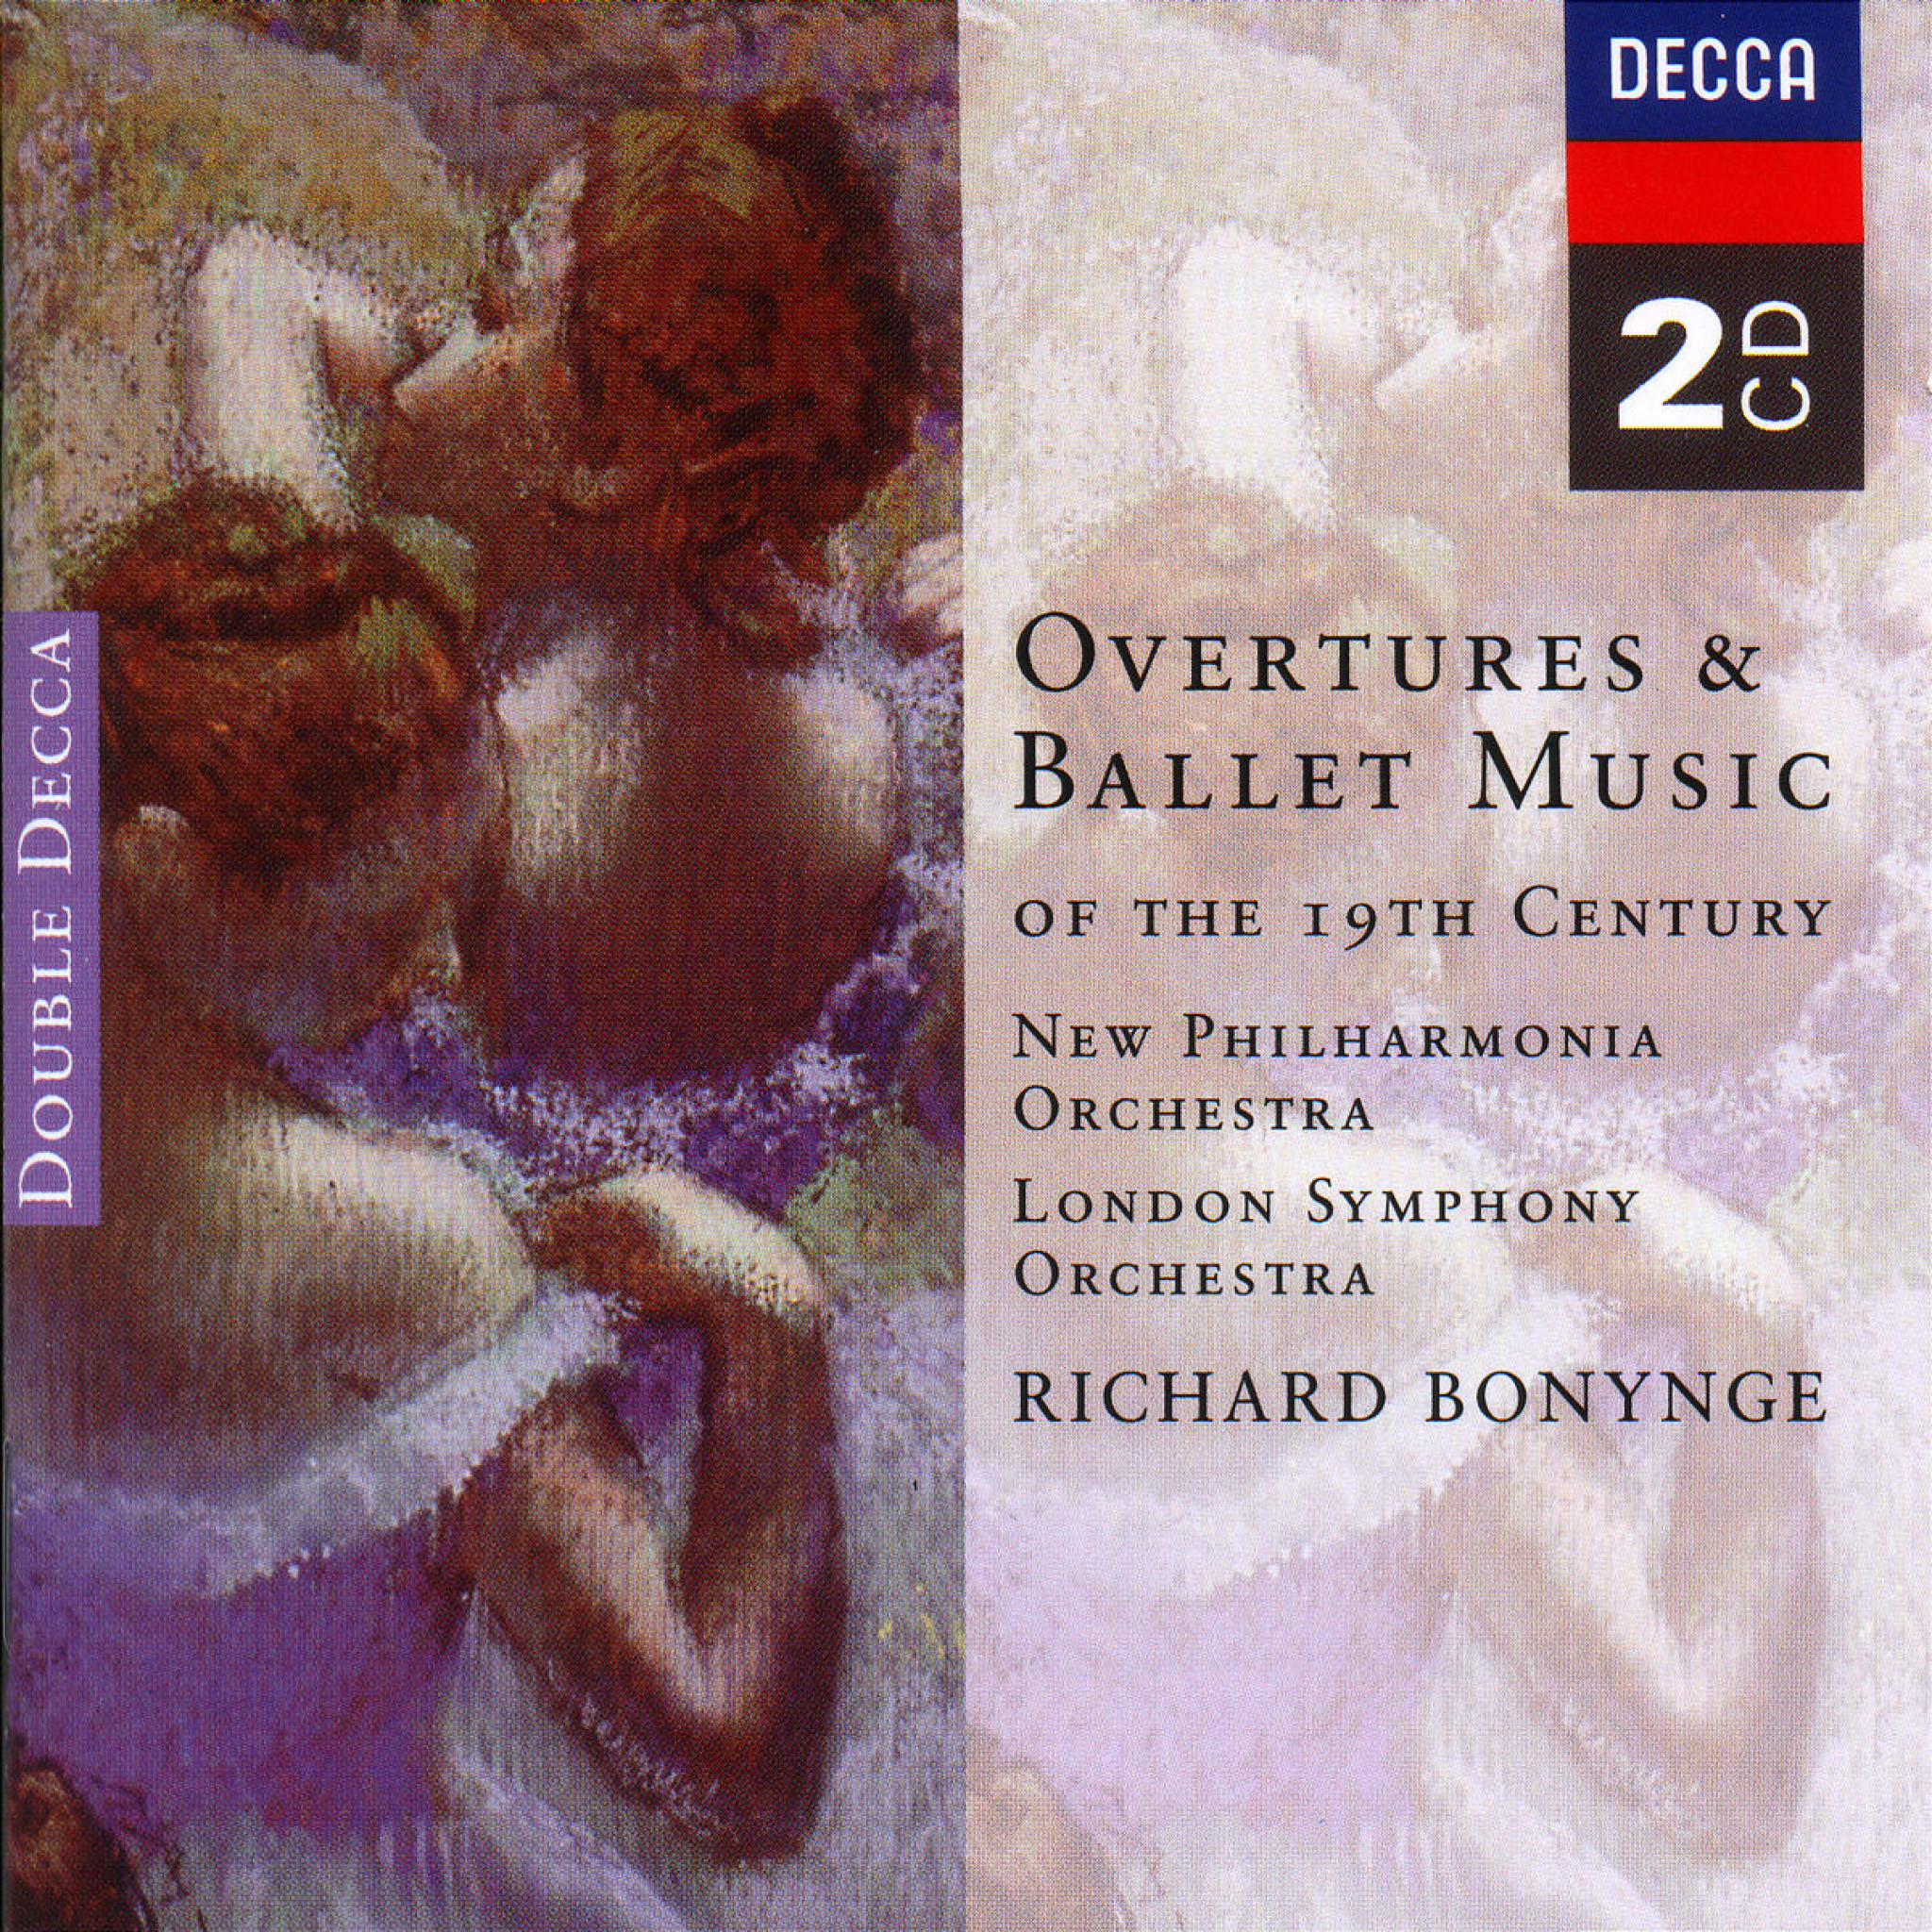 OVERTURES & BALLET MUSIC OF THE 19TH CENTURY